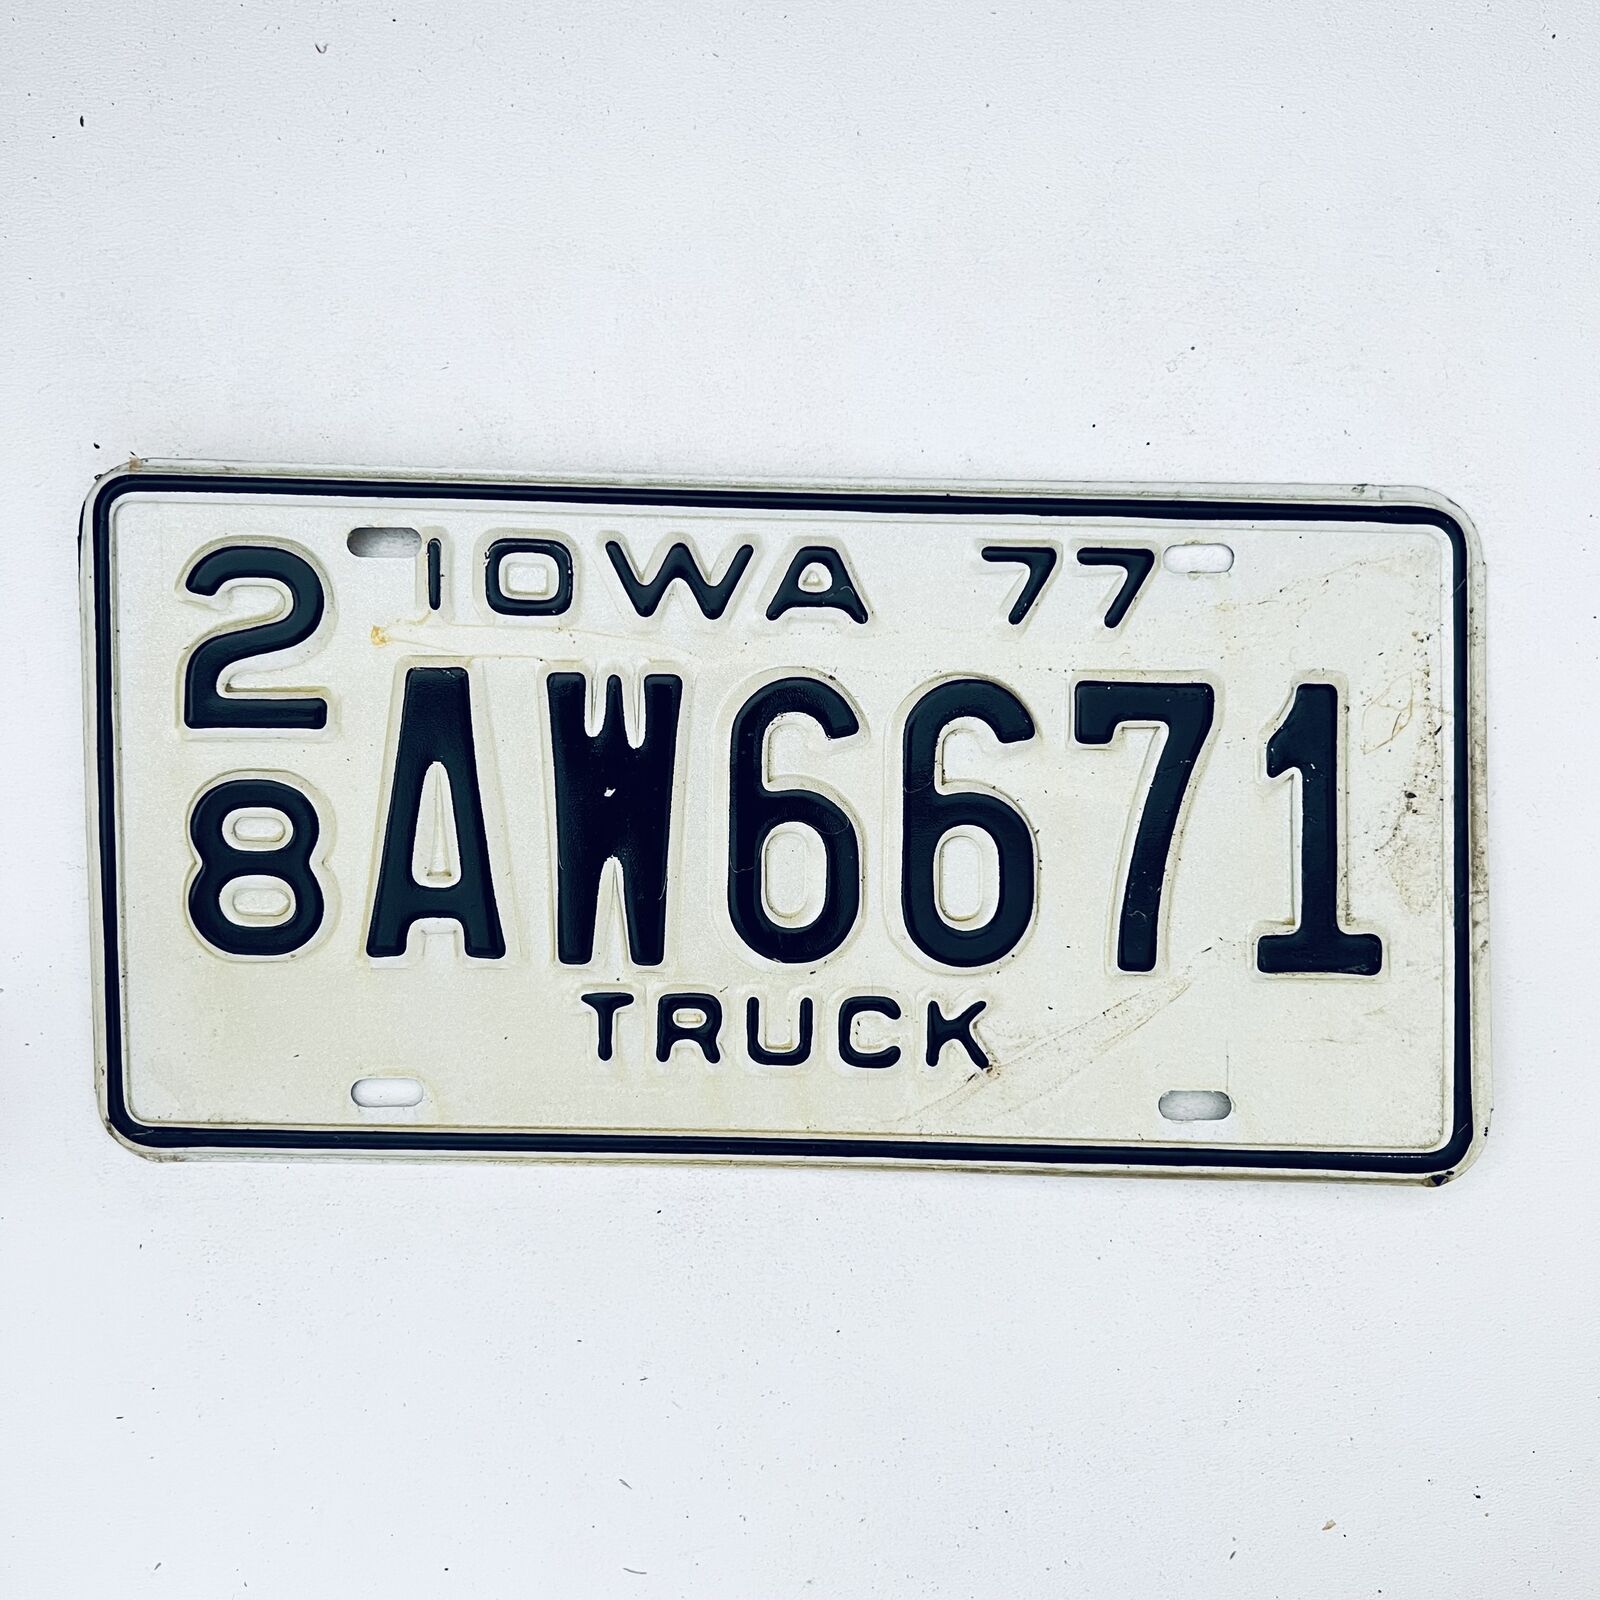 1977 United States Iowa Delaware County Passenger License Plate 28 AW6671